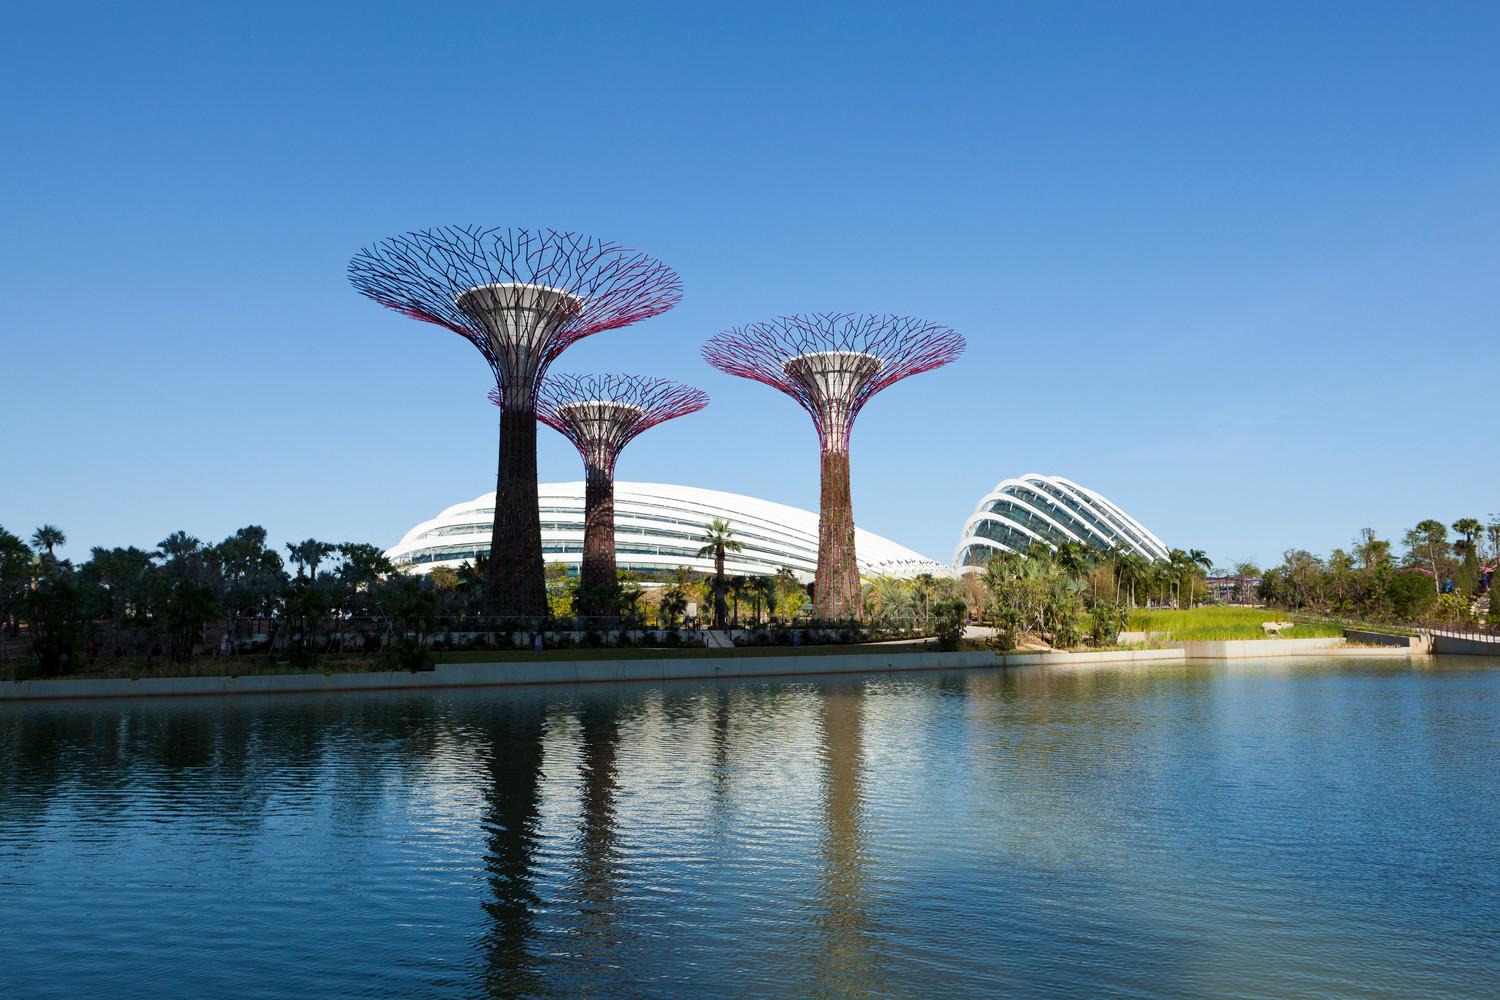 Cooled Conservatories, Gardens by the Bay - View of the Cooled Conservatories and Supertrees